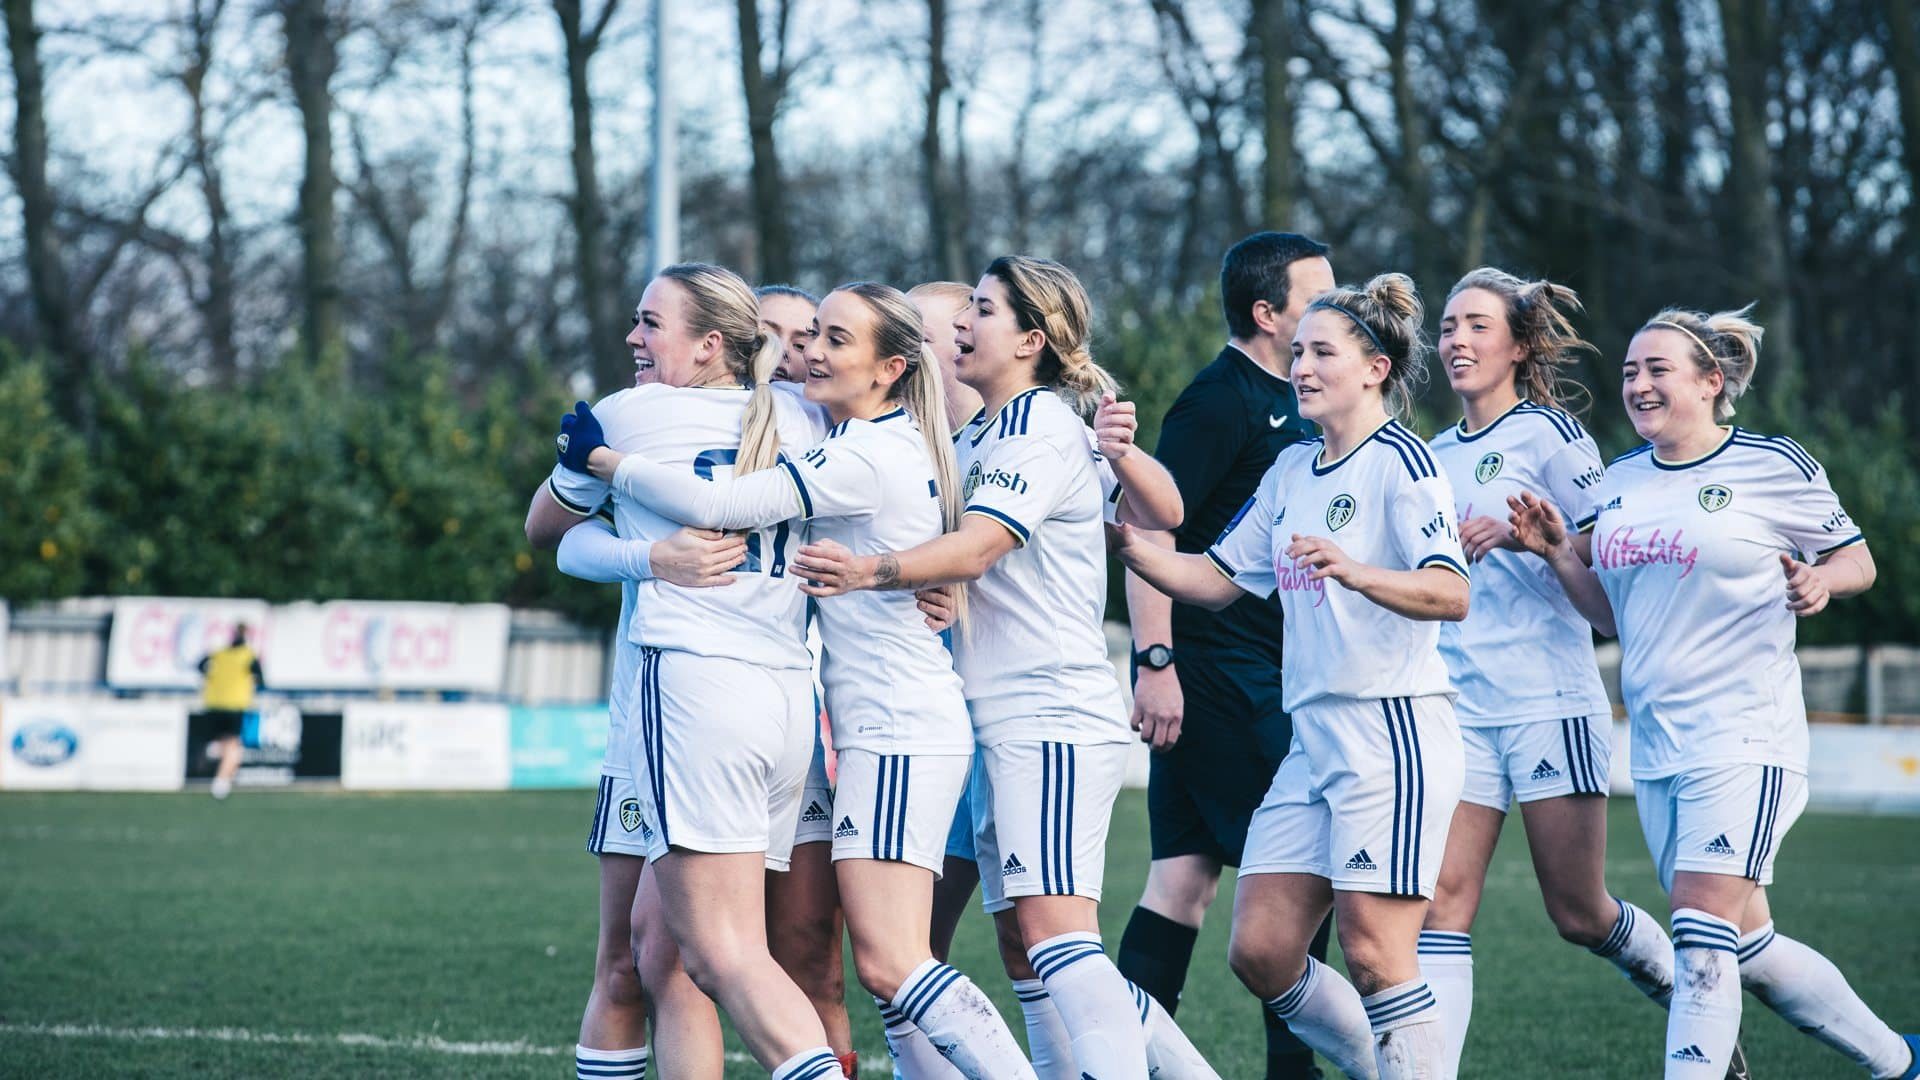 Amy Woodruff celebrating her second goal for Leeds against Southampton, with a full squad of teammates joining in